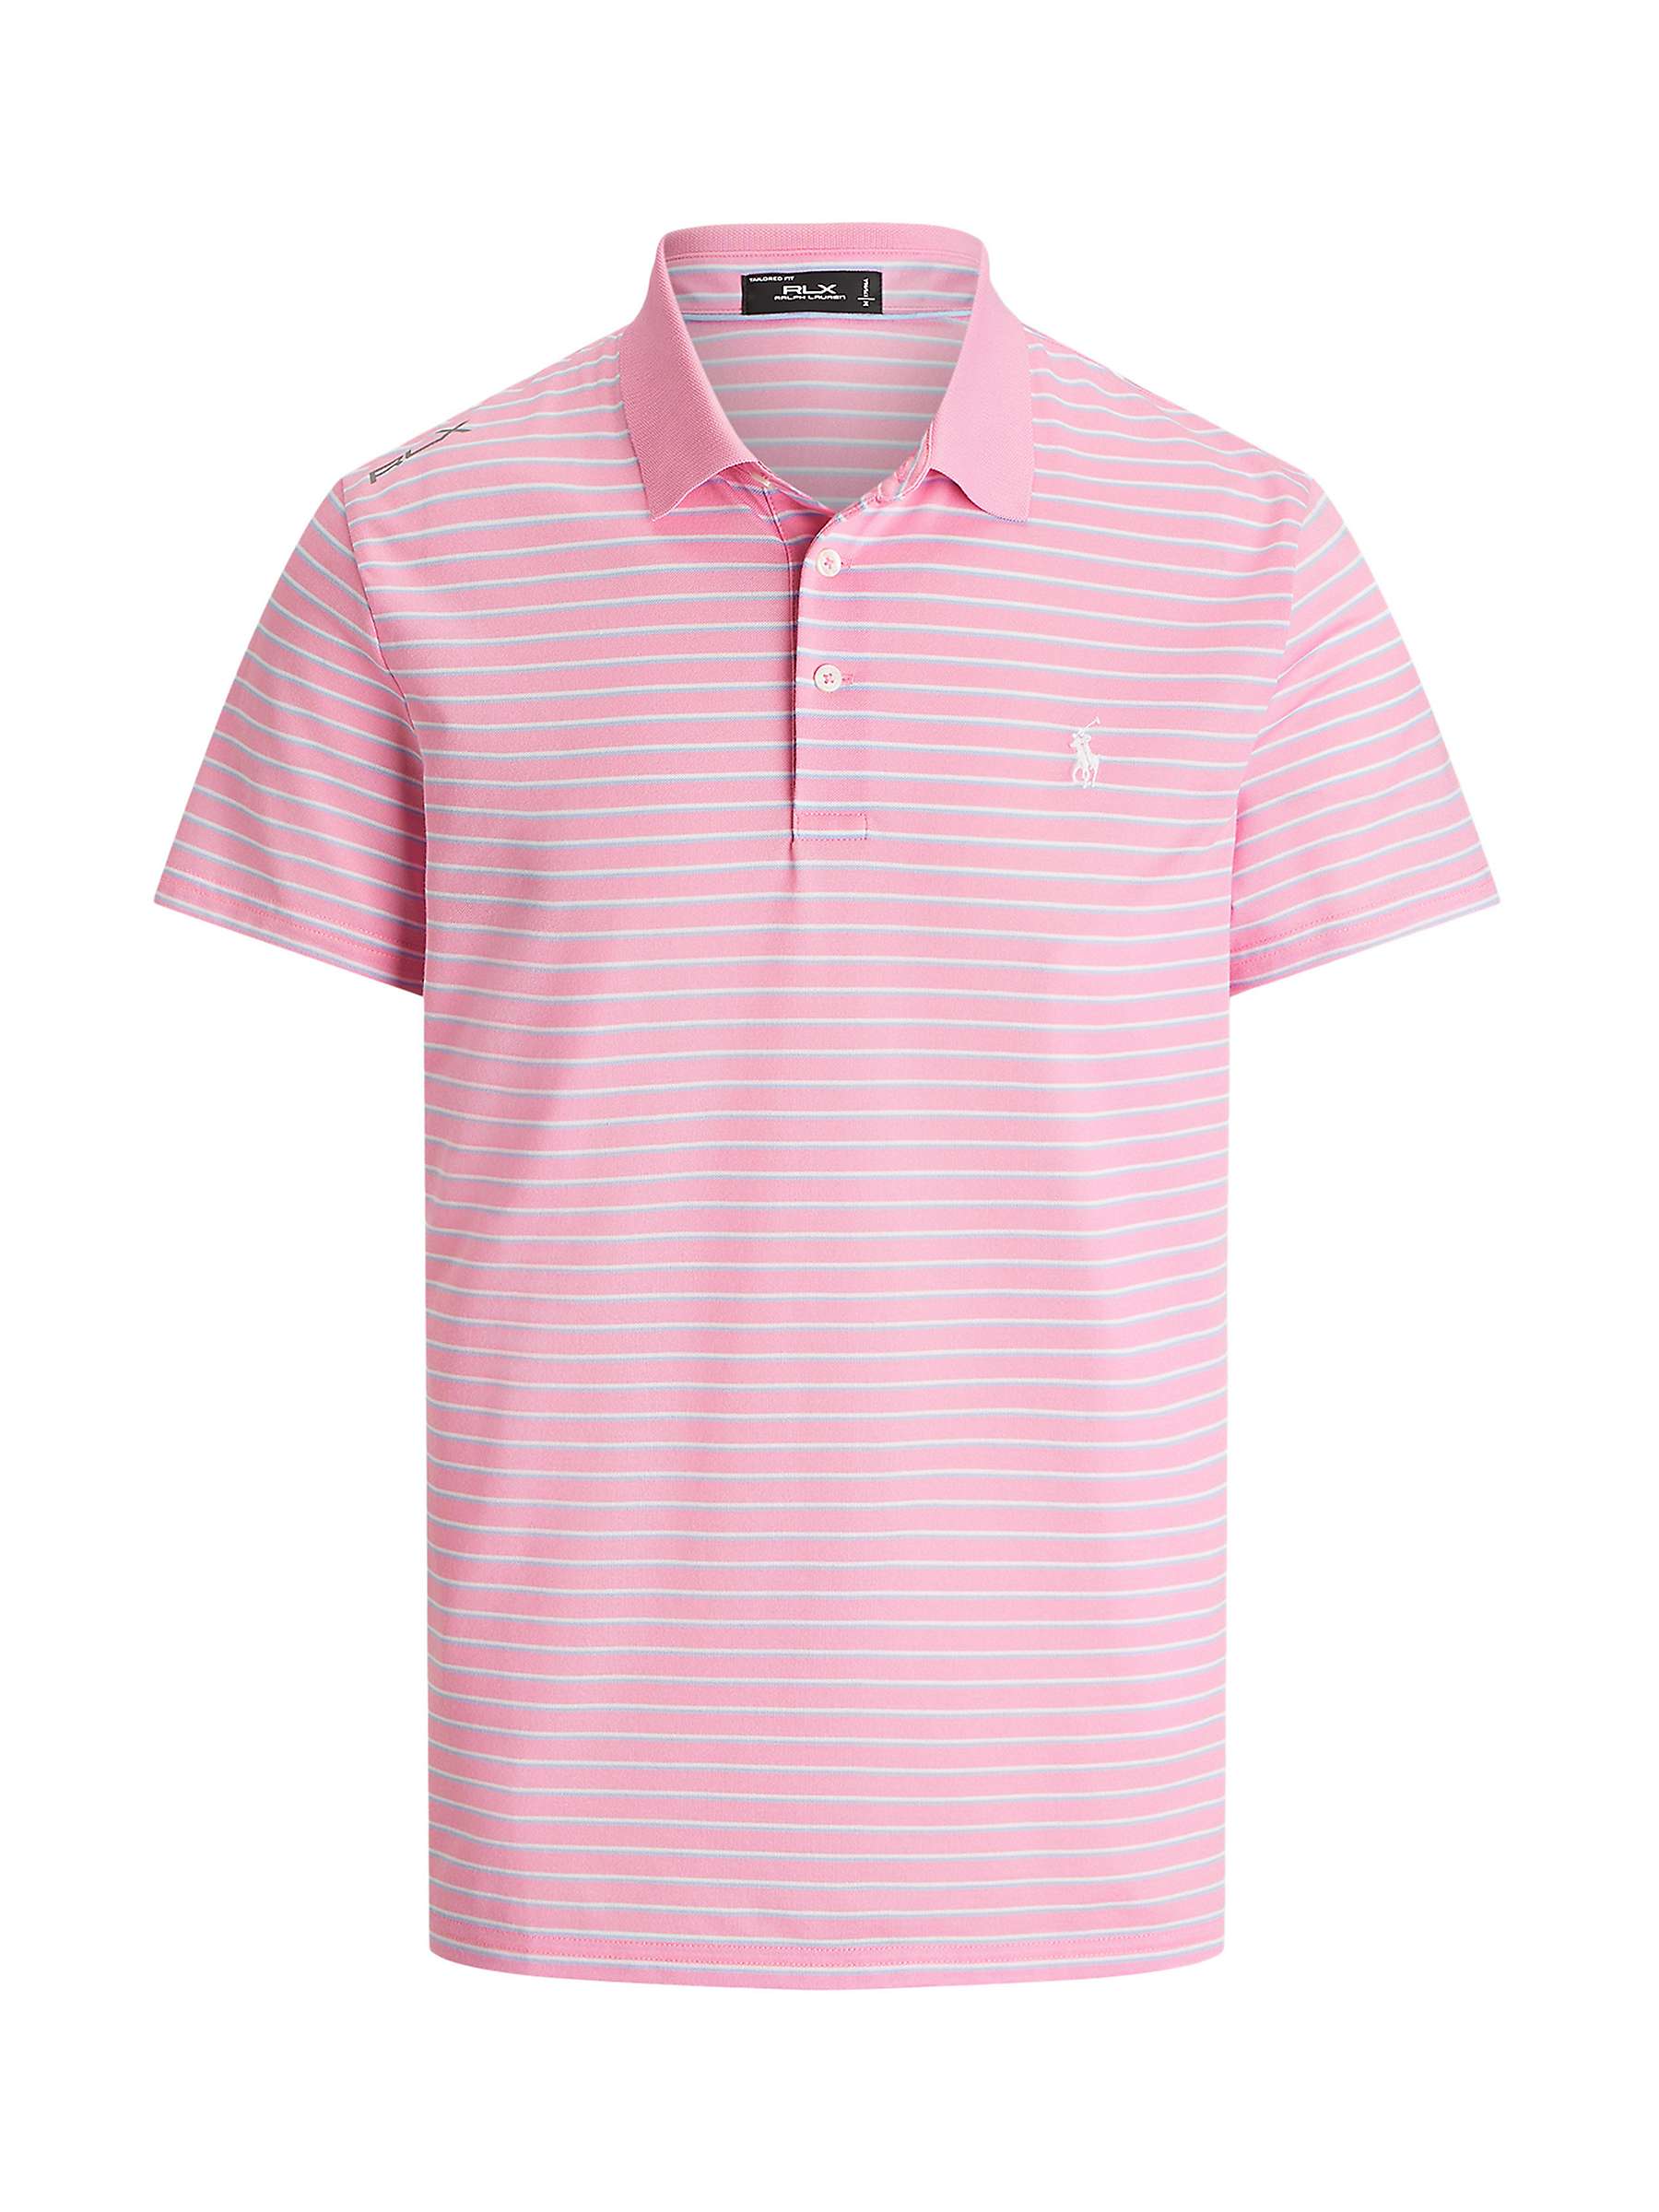 Buy Ralph Lauren Tailored Fit Performance Stripe Polo Shirt Online at johnlewis.com